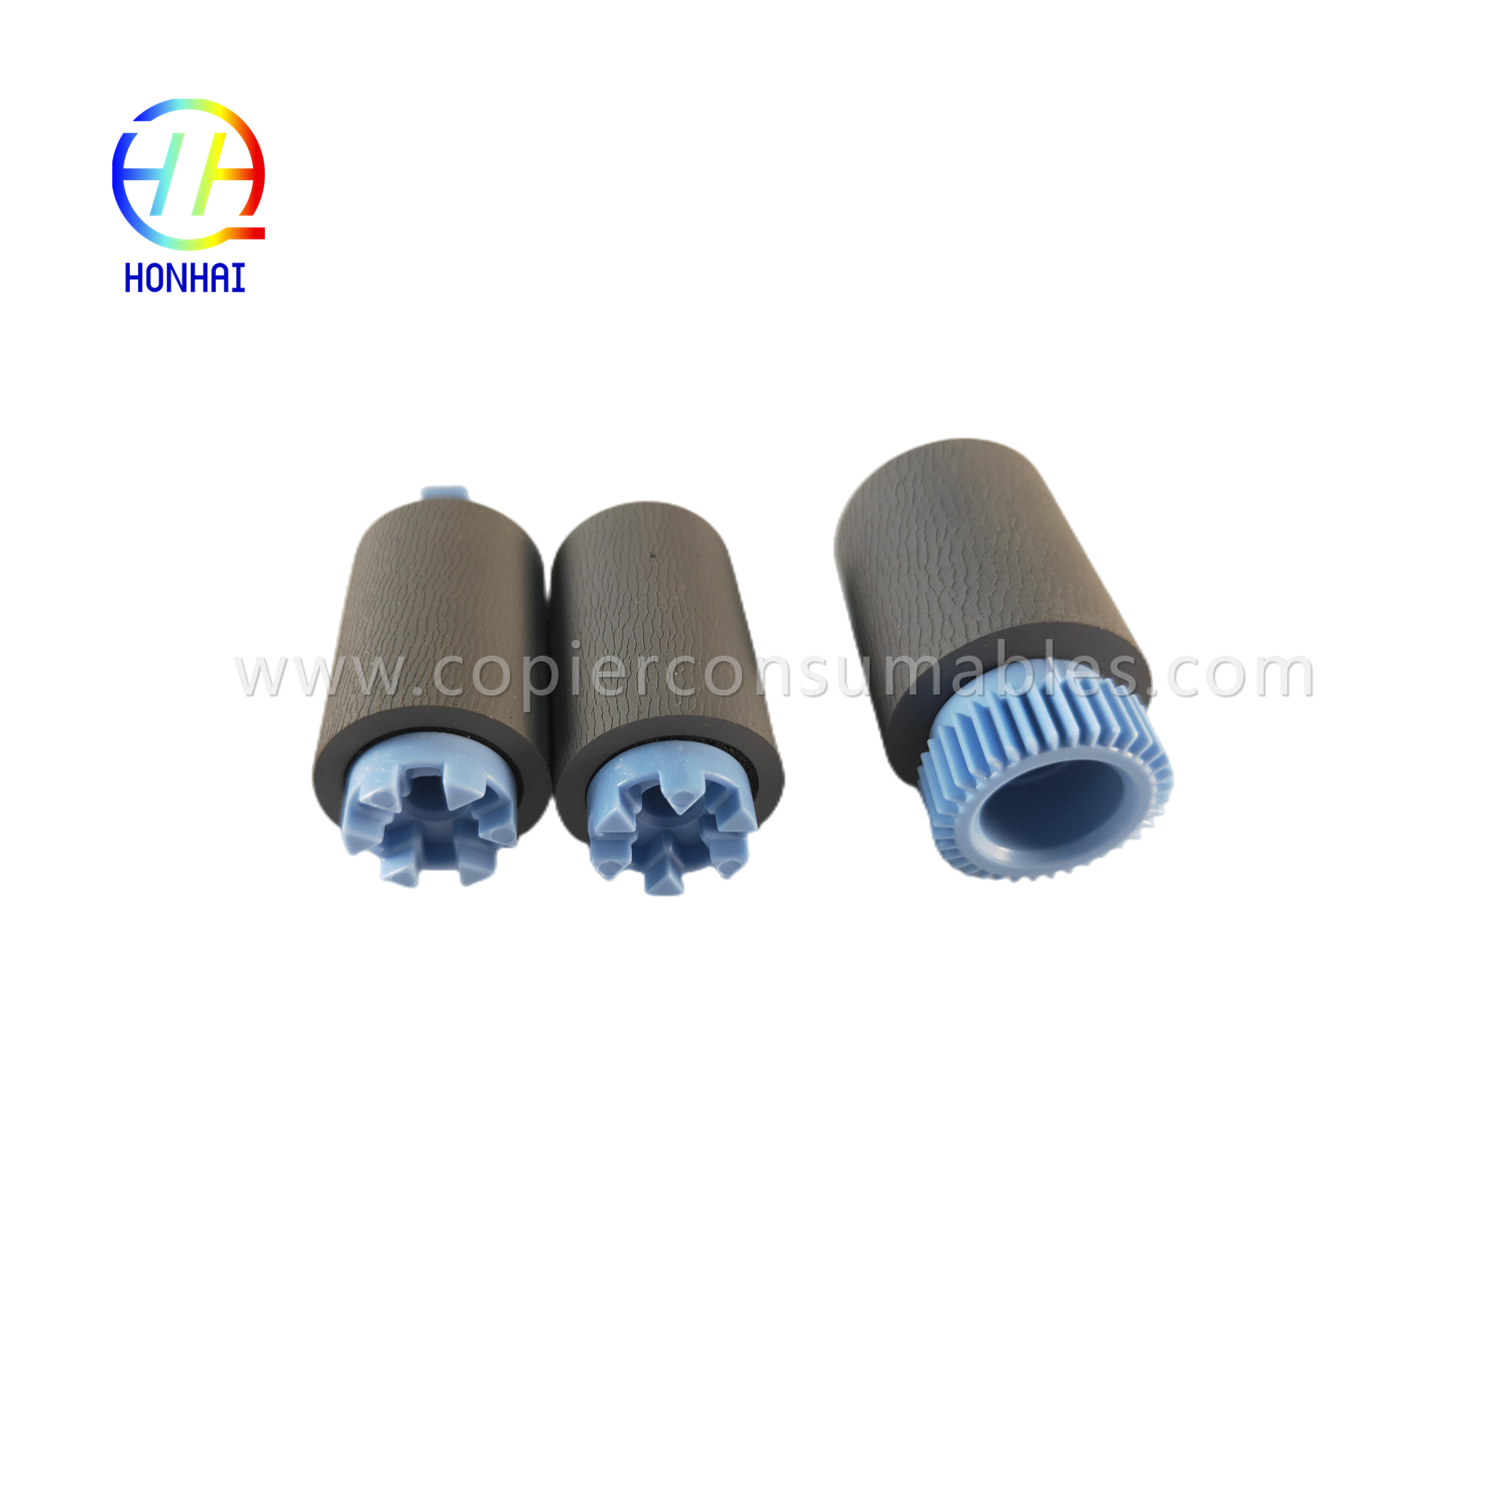 https://www.copierconsumables.com/tray-2-5-pickup-feed-separation-roller-set-for-hp-a7w93-67082-mfp-785f-780dn-e77650z-e77660z-e77650dn-e77660dn-p77740dn- p77750z-p77760z-p75050dn-p75050dw-proizvod/